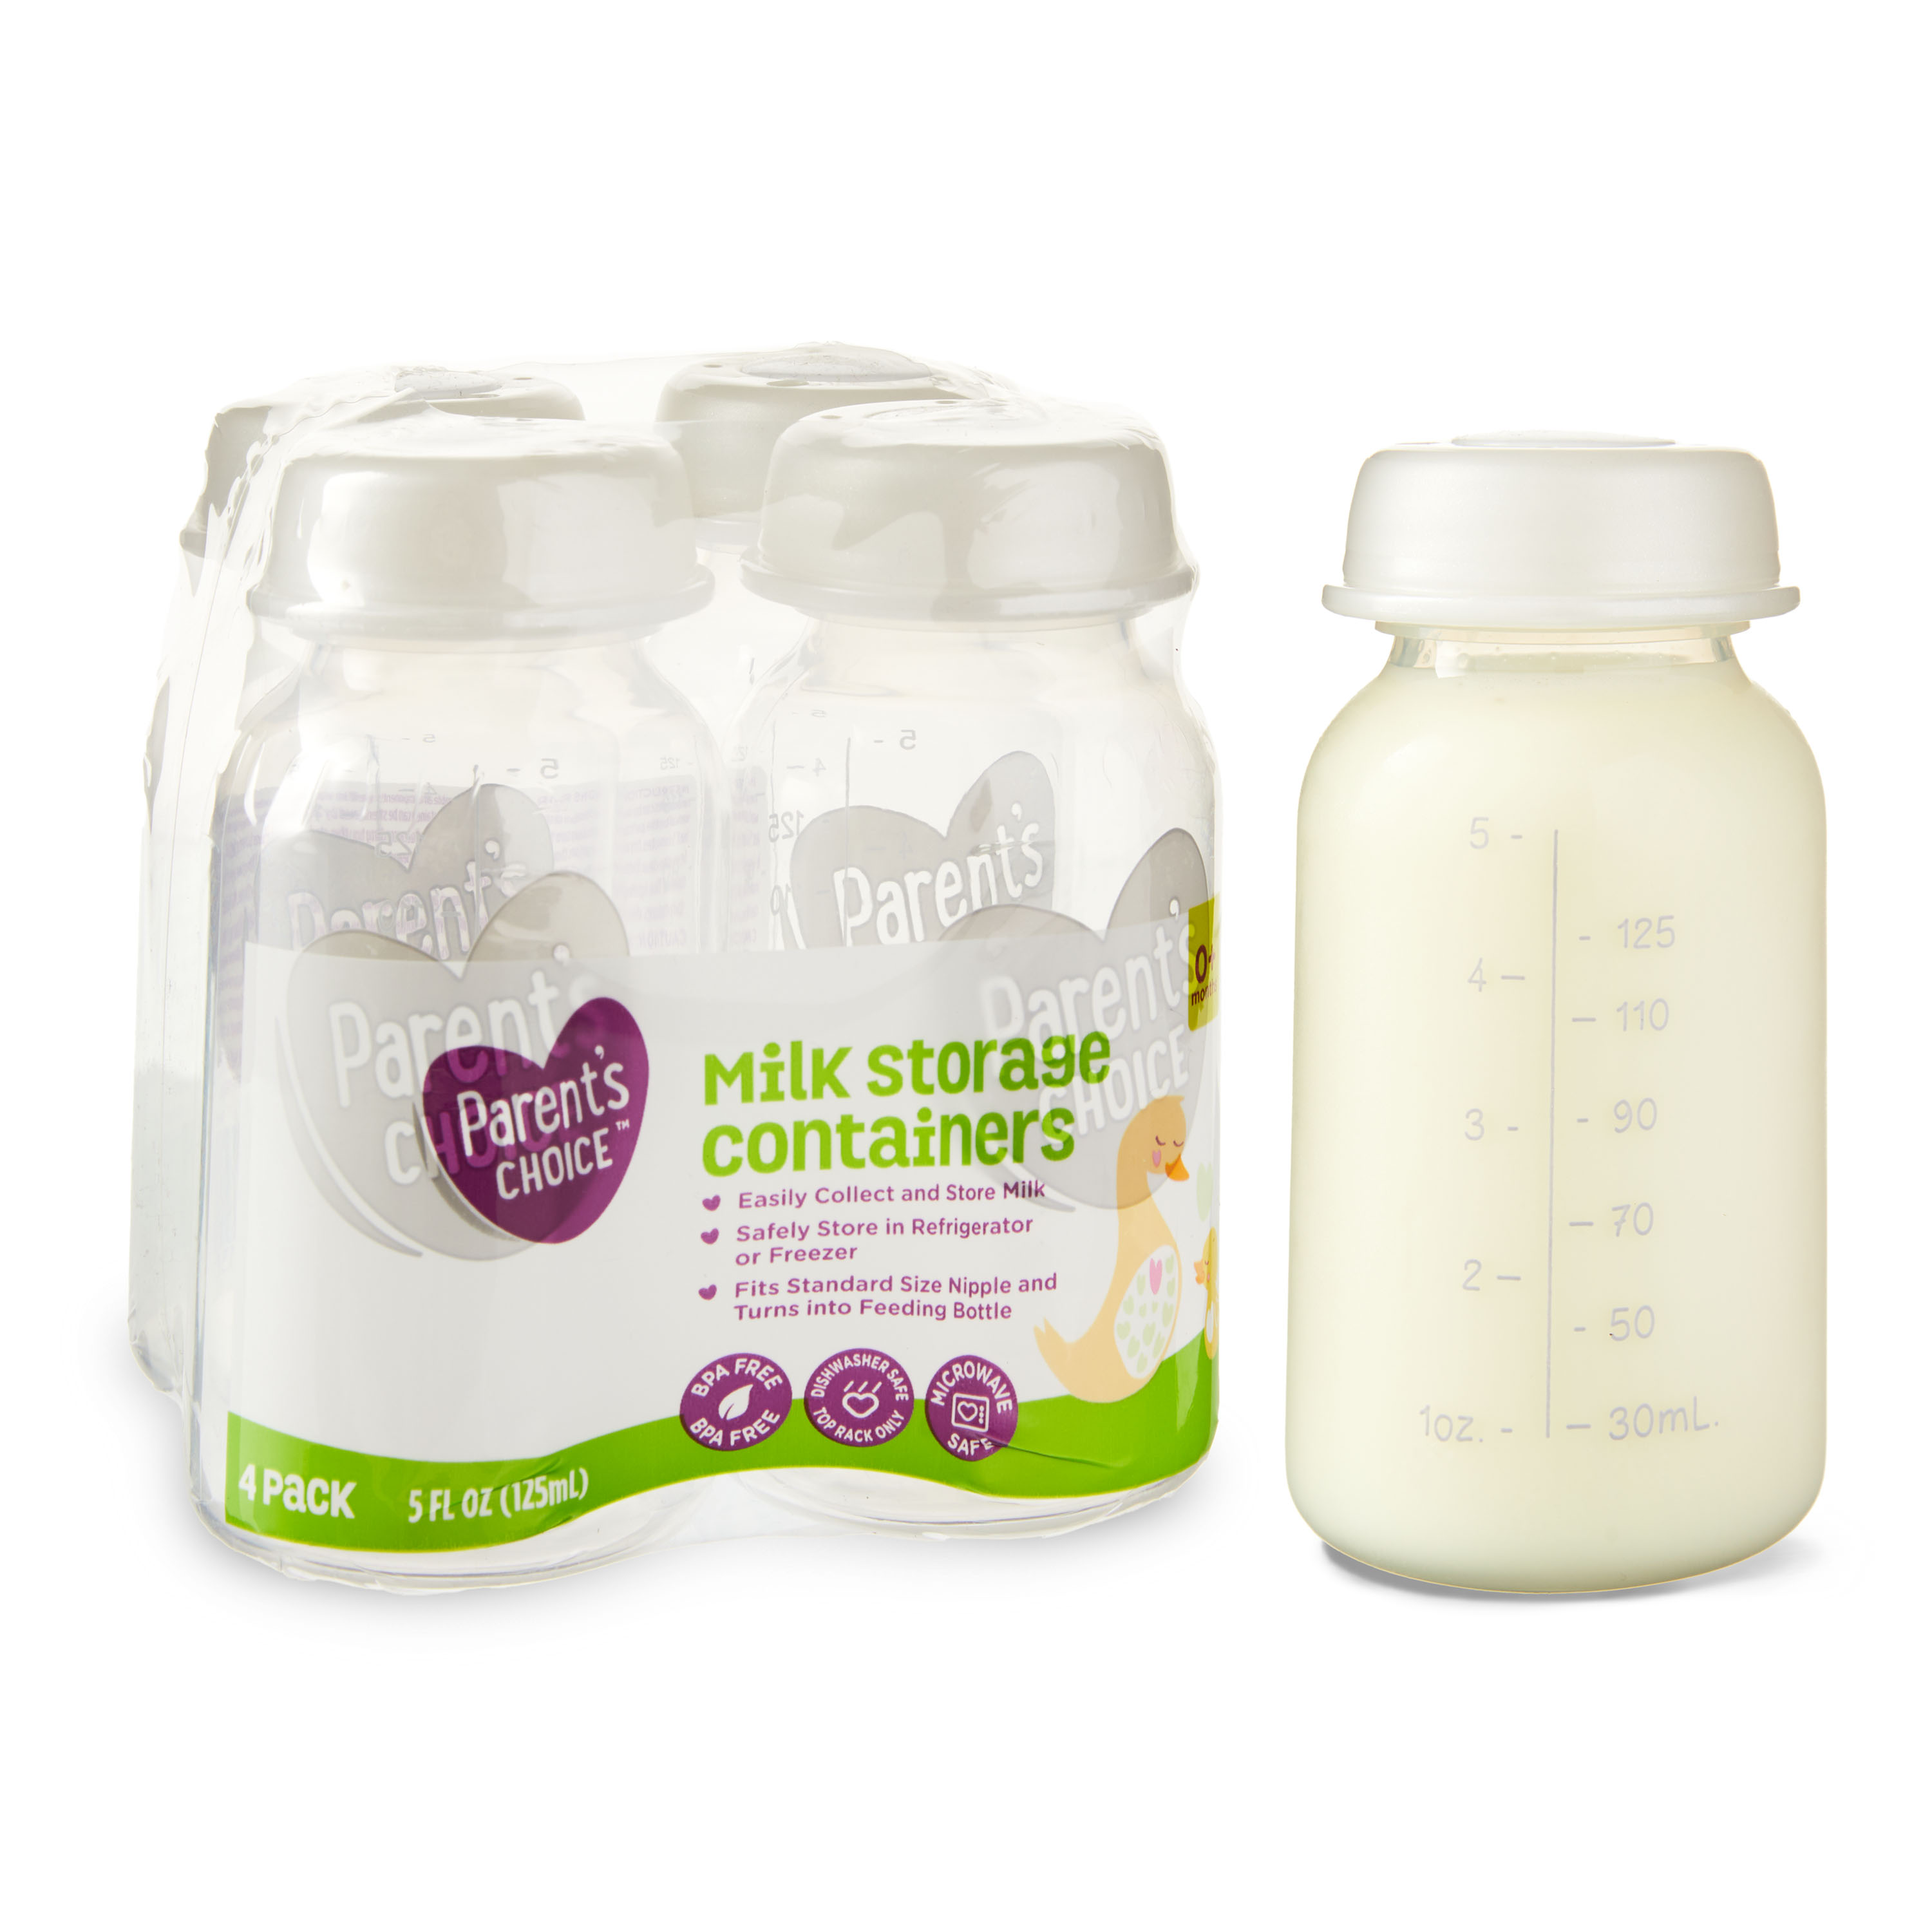 Parent's Choice Milk Storage Containers, 0+ Months, 5 fl oz, 4 Pack - image 1 of 8